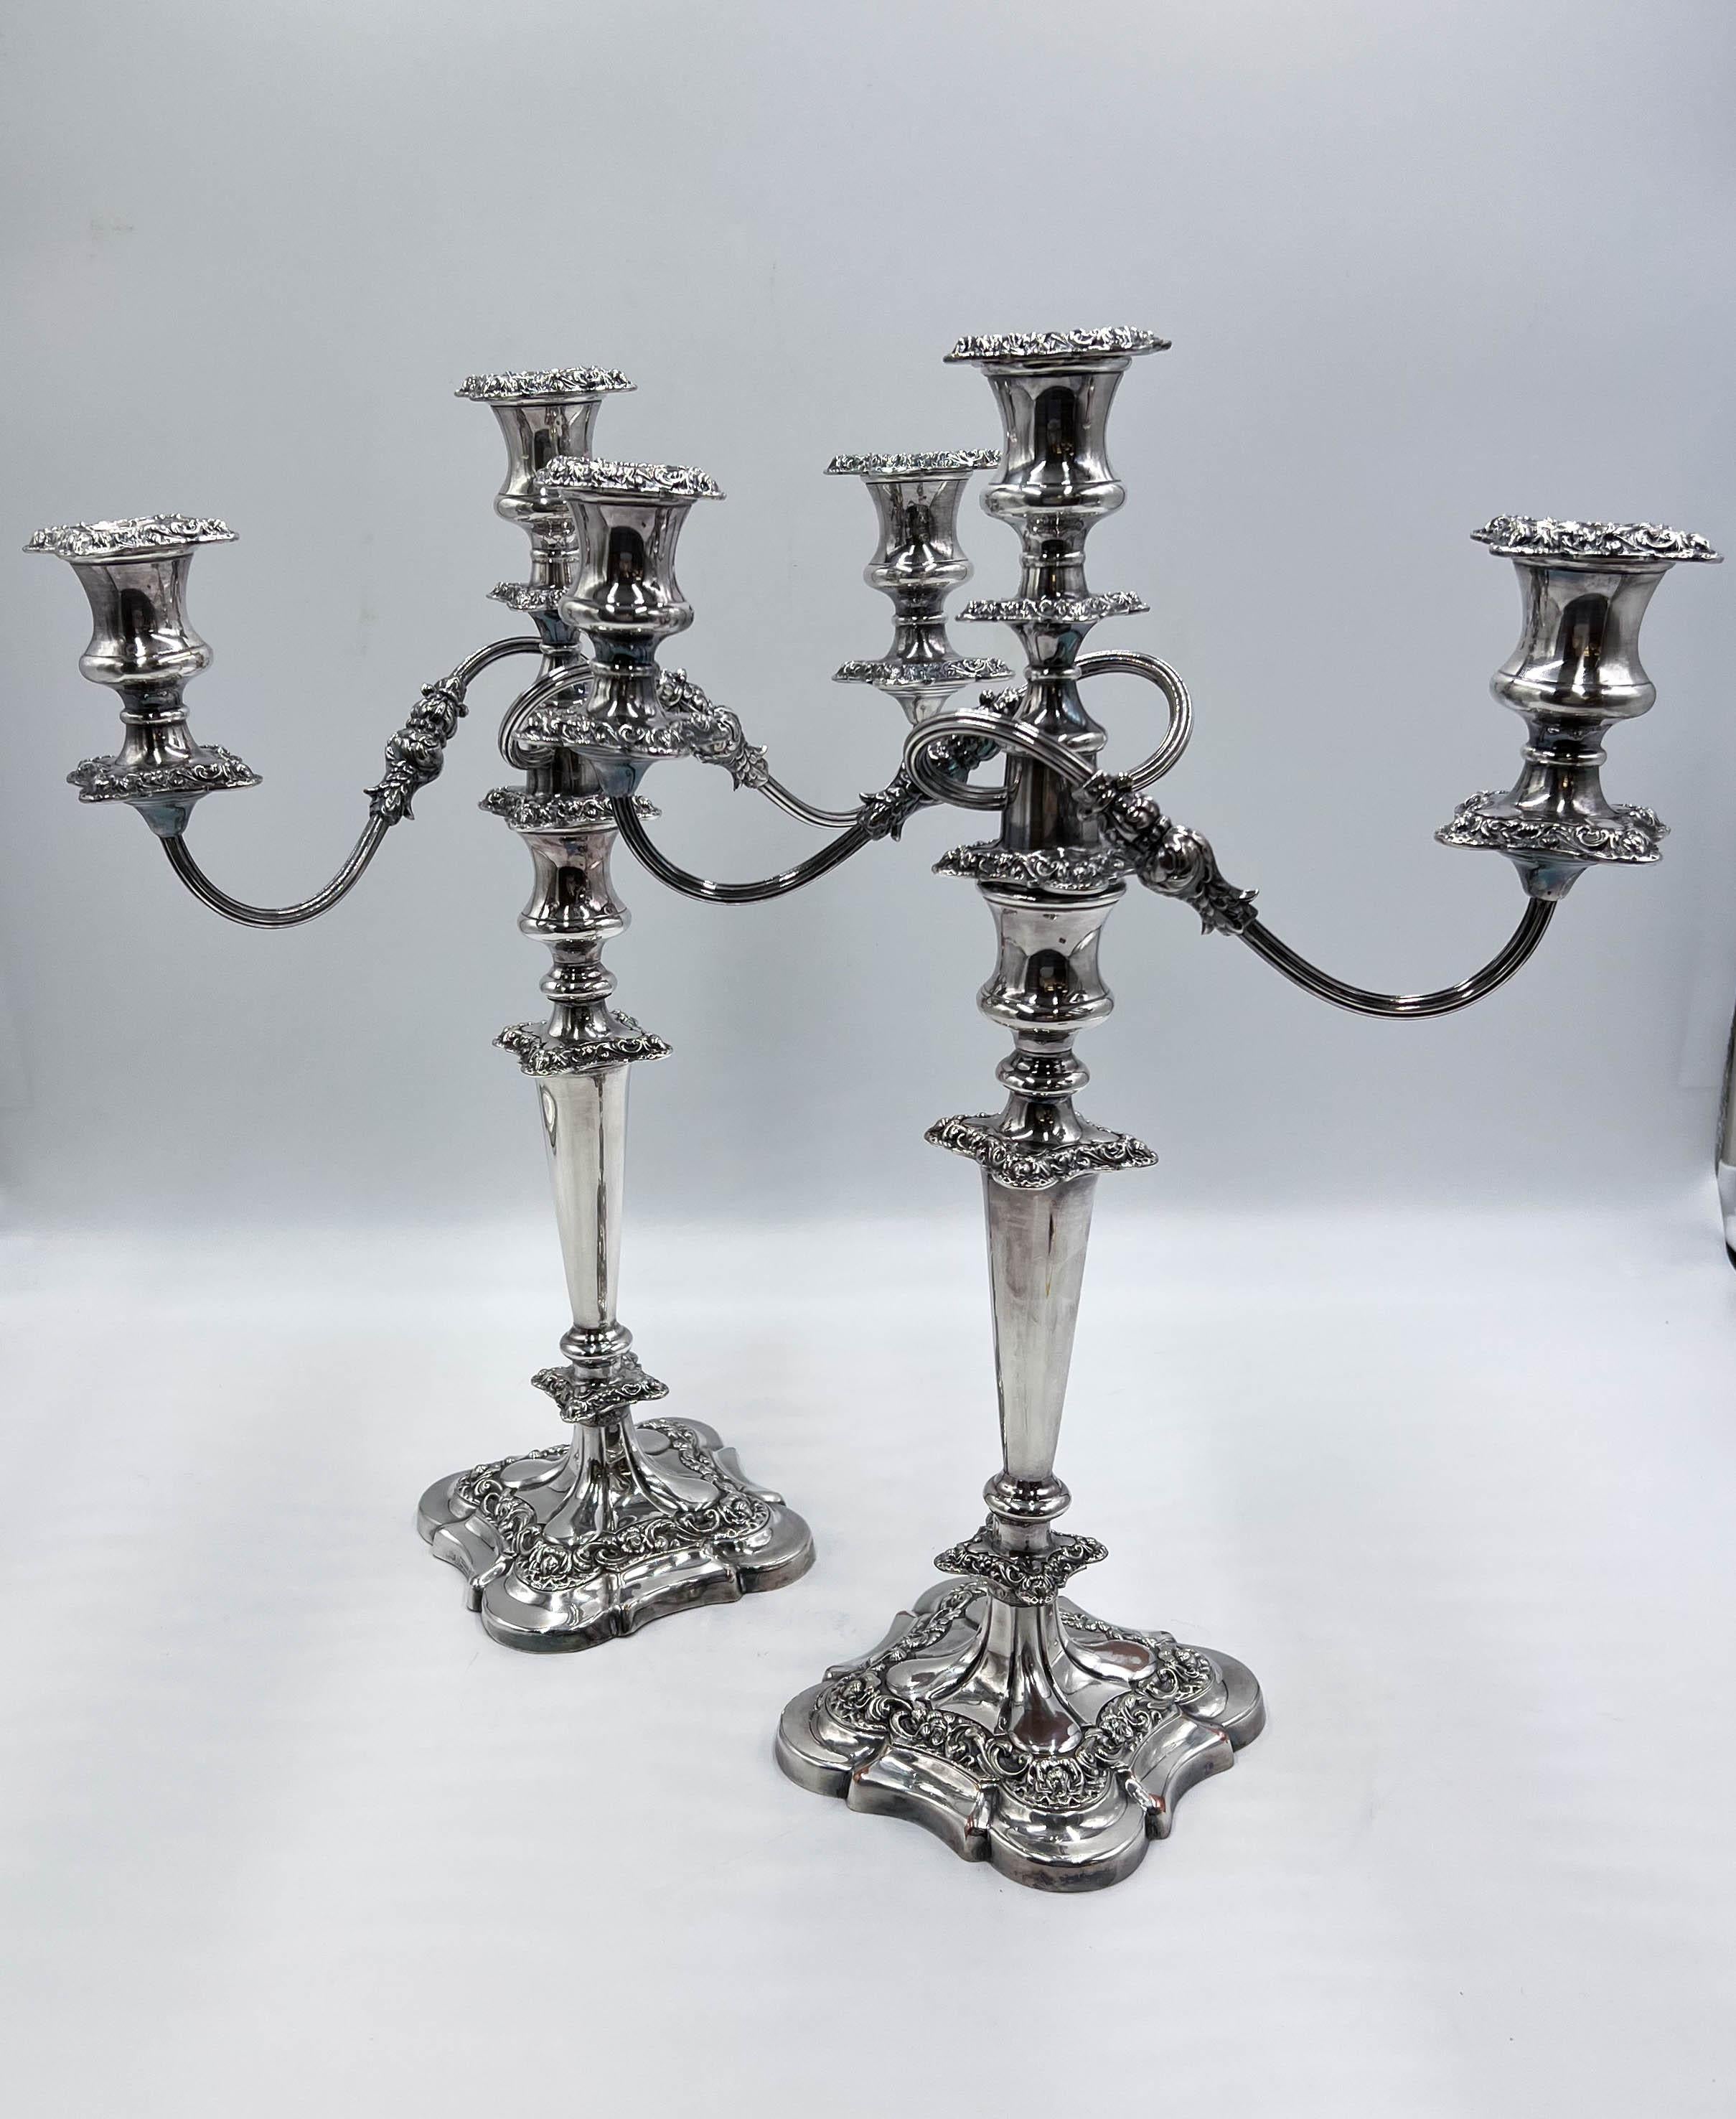 A pair of antique silver-plated candelabras/candlesticks crafted by the renowned English company William Suckling Ltd, dating back to the 1920s. For versatility, the arm of the candelabra is removable, transforming the candelabra into a standalone